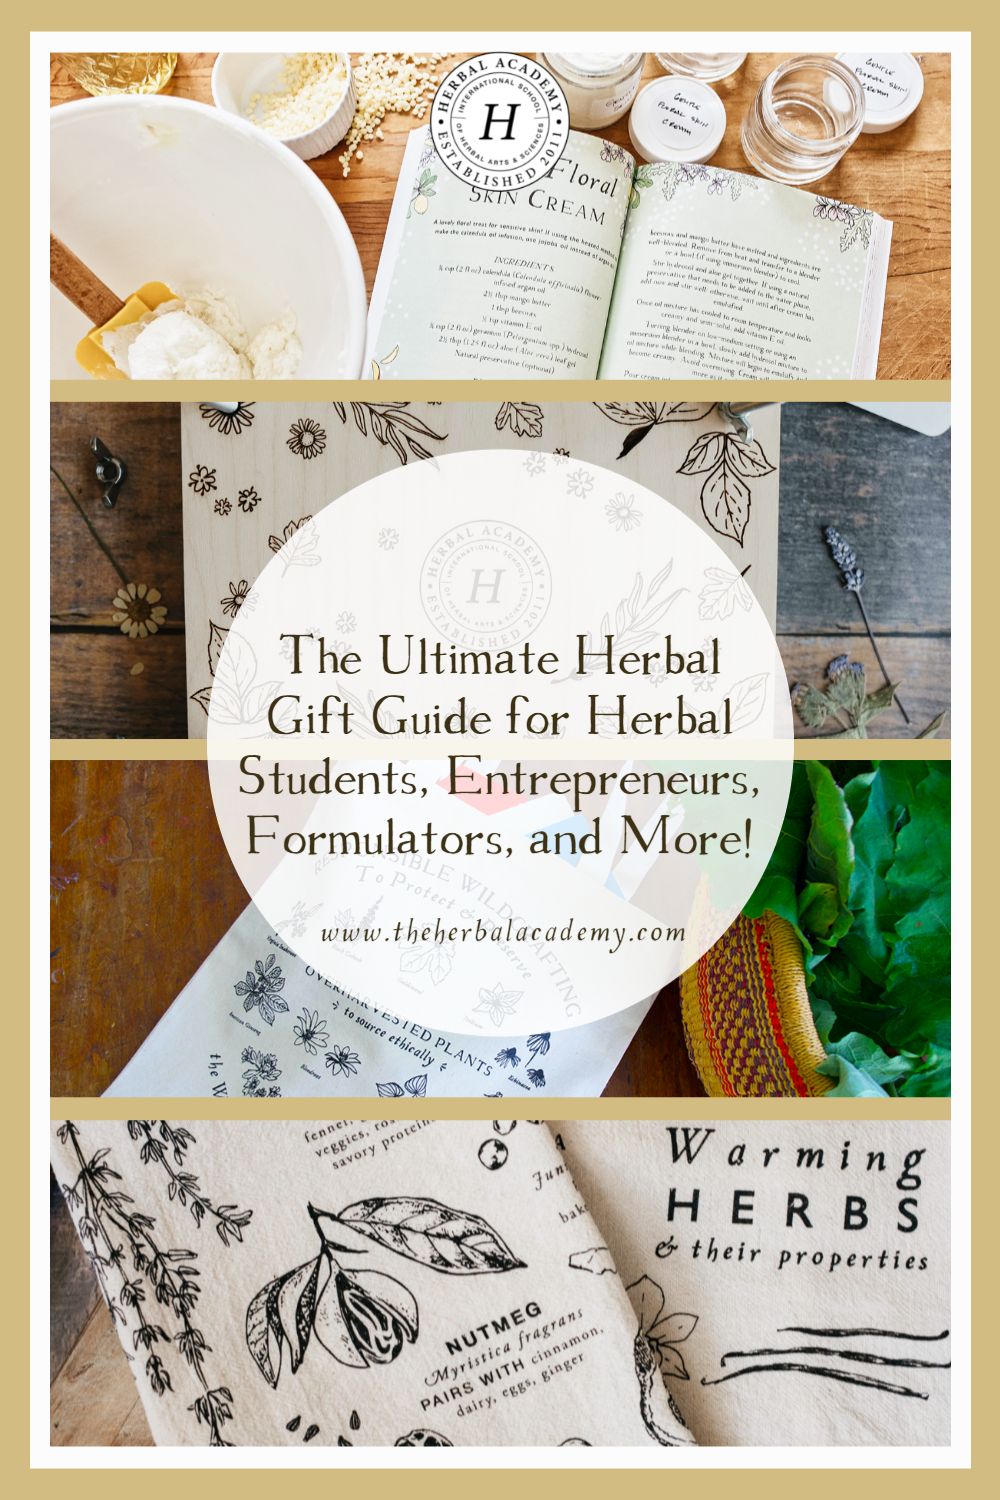 The Ultimate Herbal Gift Guide for Herbal Students, Entrepreneurs, Formulators, and More! | Herbal Academy | From stocking stuffers to business tools, this useful gift guide will help you select the perfect present that’s sure to be enjoyed.